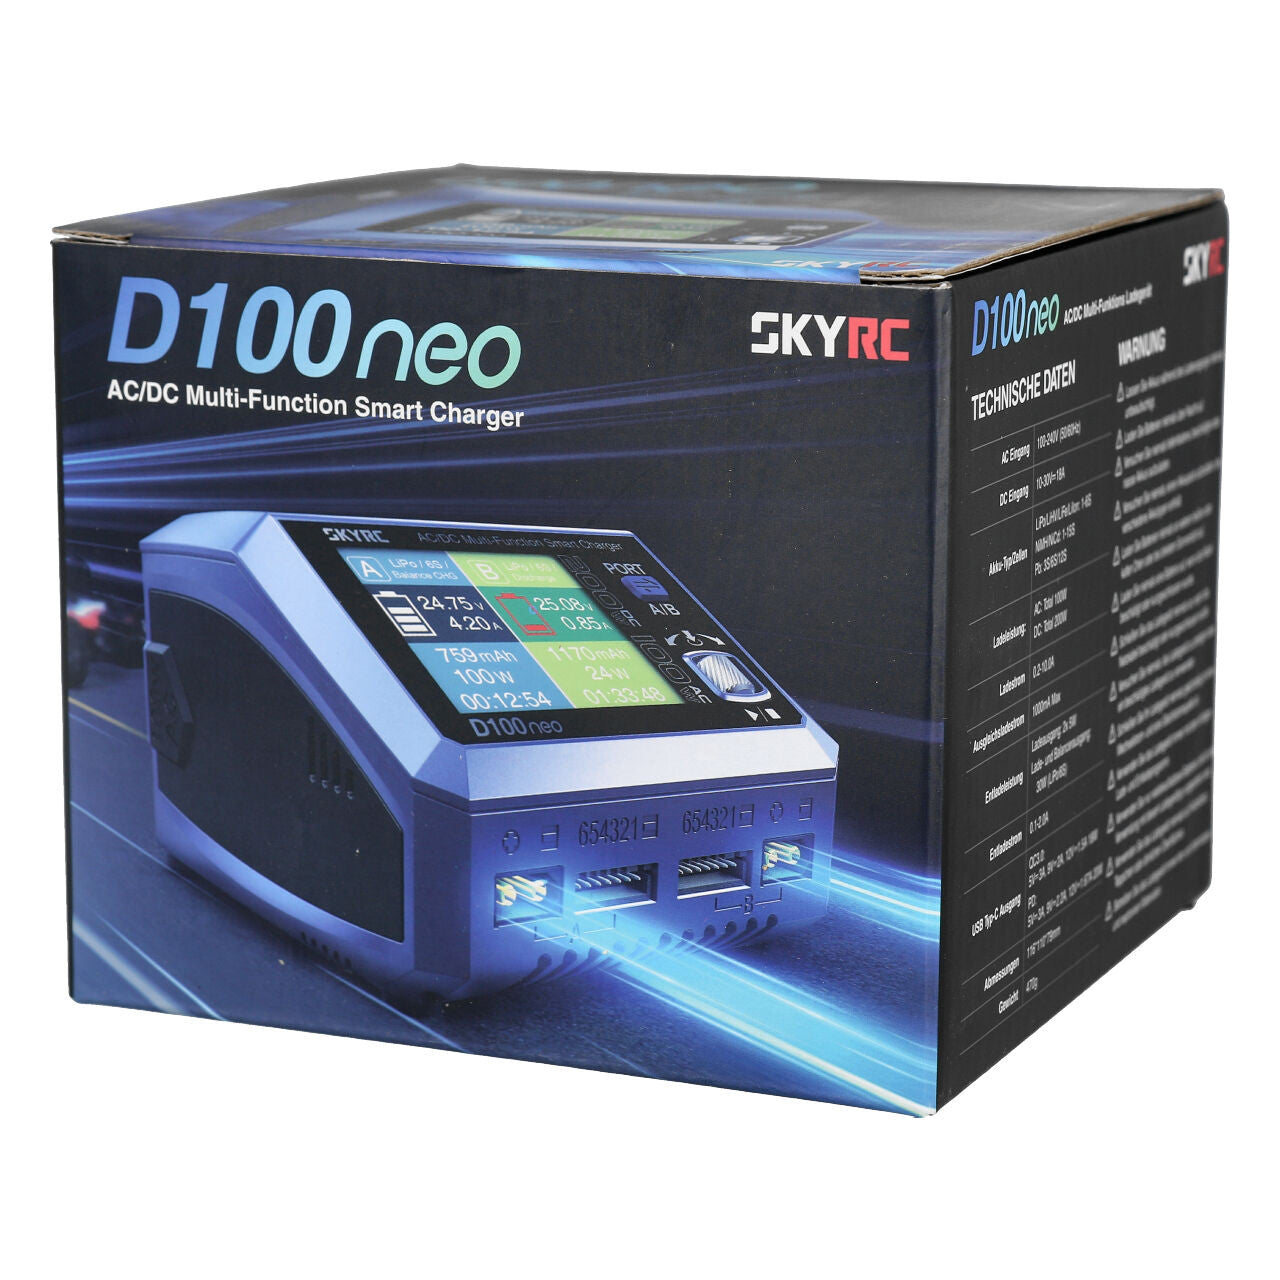 SkyRc Chargeur D100 Neo Duo 1-6S 100W AC/DC SK100199-01